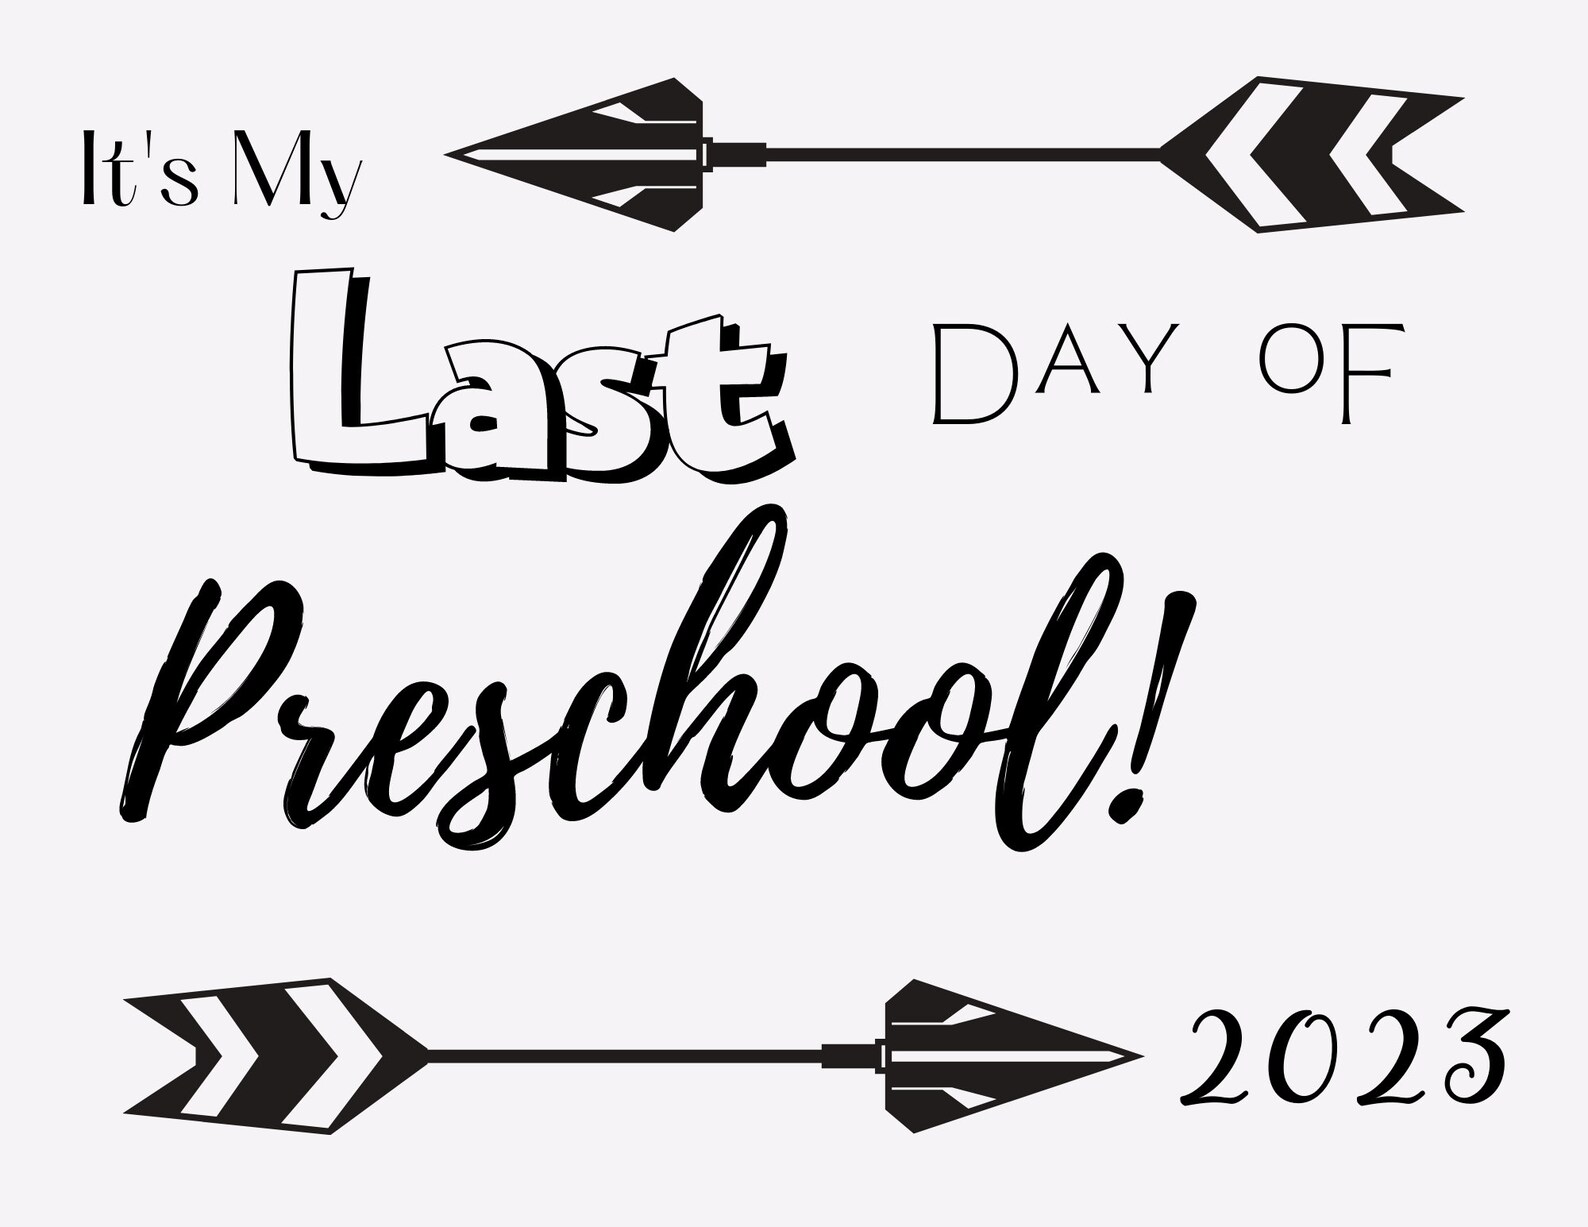 back-to-school-signs-for-2022-2023-school-year-first-day-of-etsy